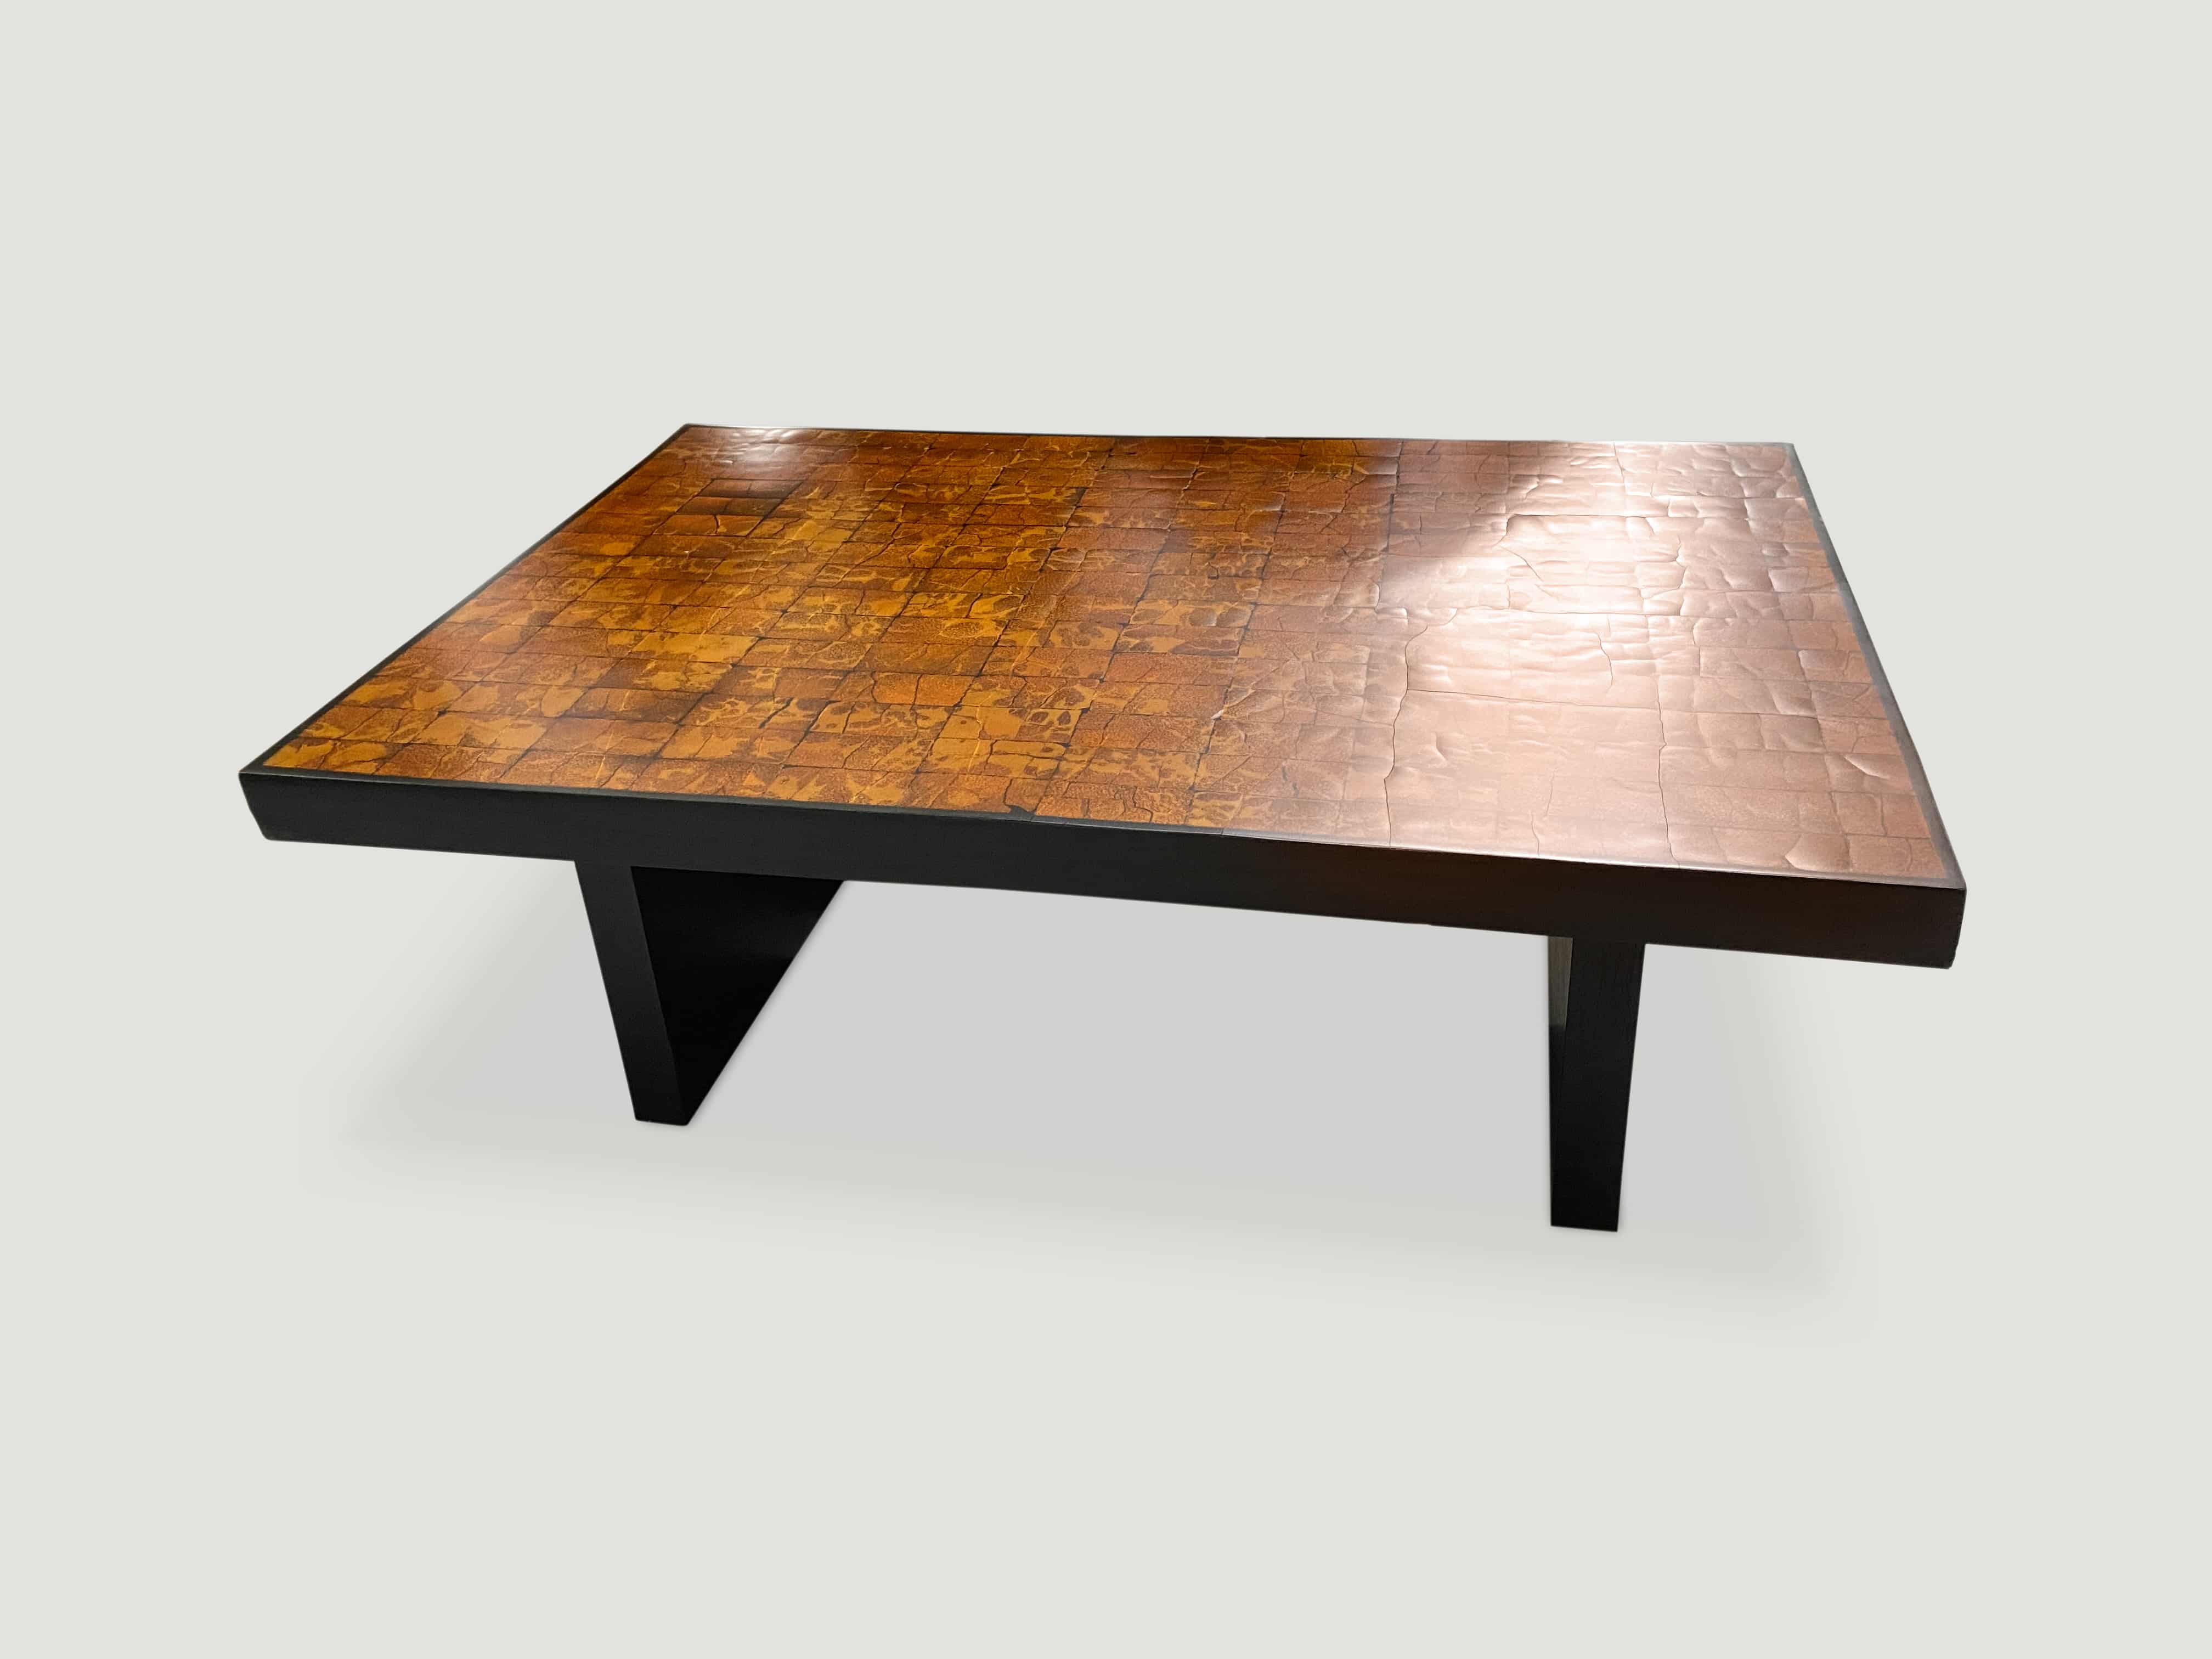 cracked coconut shell coffee table